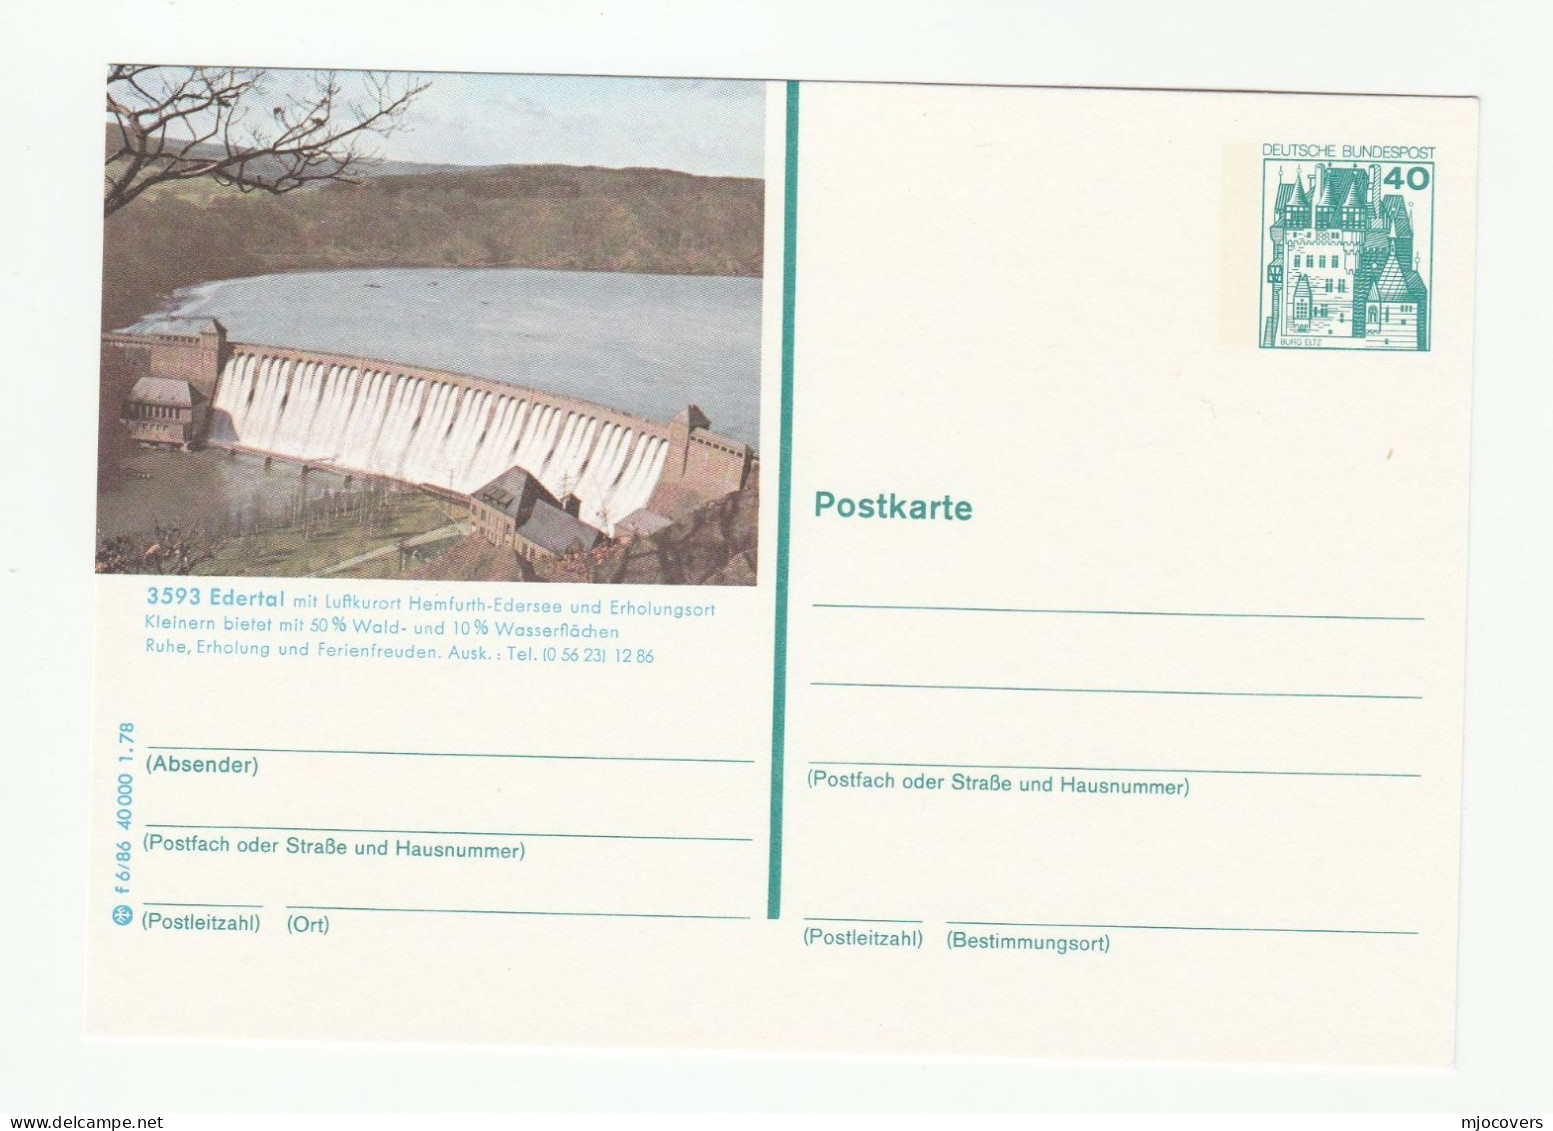 Edertal HYDROELECTRIC DAM Postal STATIONERY Card  1978 Germany Cover Electricity Energy Hydro Water - Water